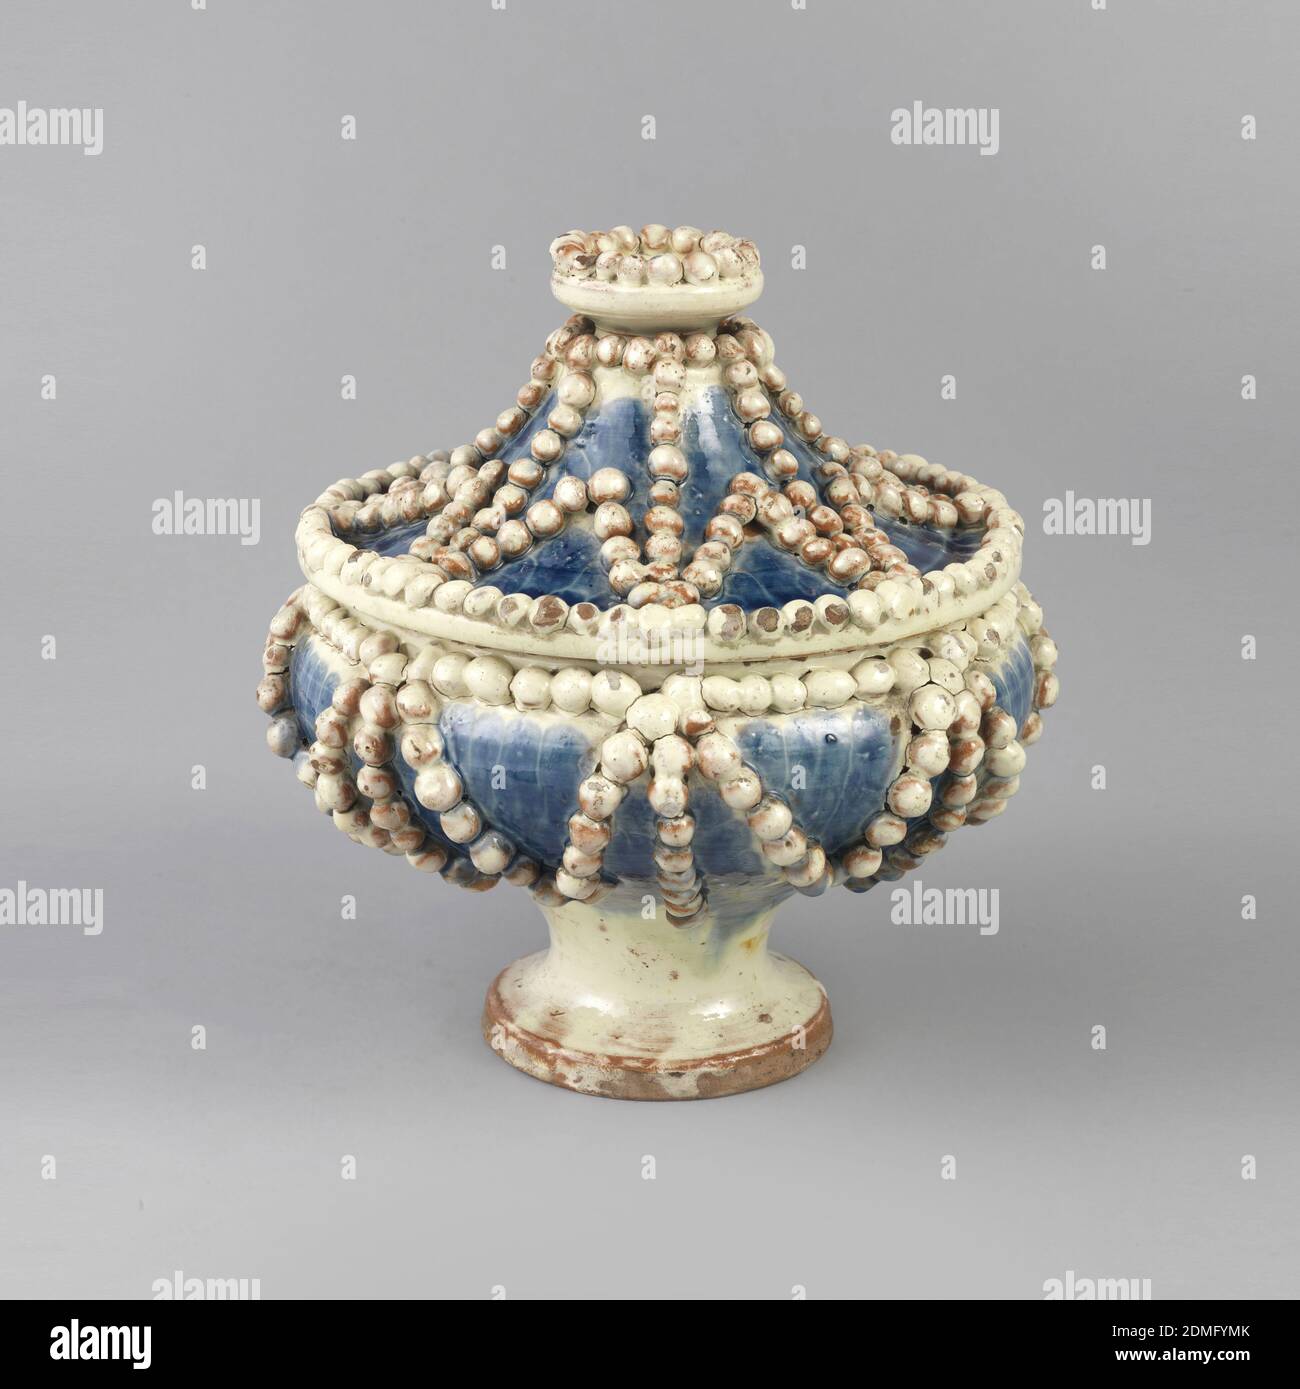 Bowl and lid, Earthenware, Blue footed bowl with star pattern of white pearls all over. Finial made up of crown of pearls., Switzerland, 18th century, ceramics, Decorative Arts, Bowl and lid Stock Photo